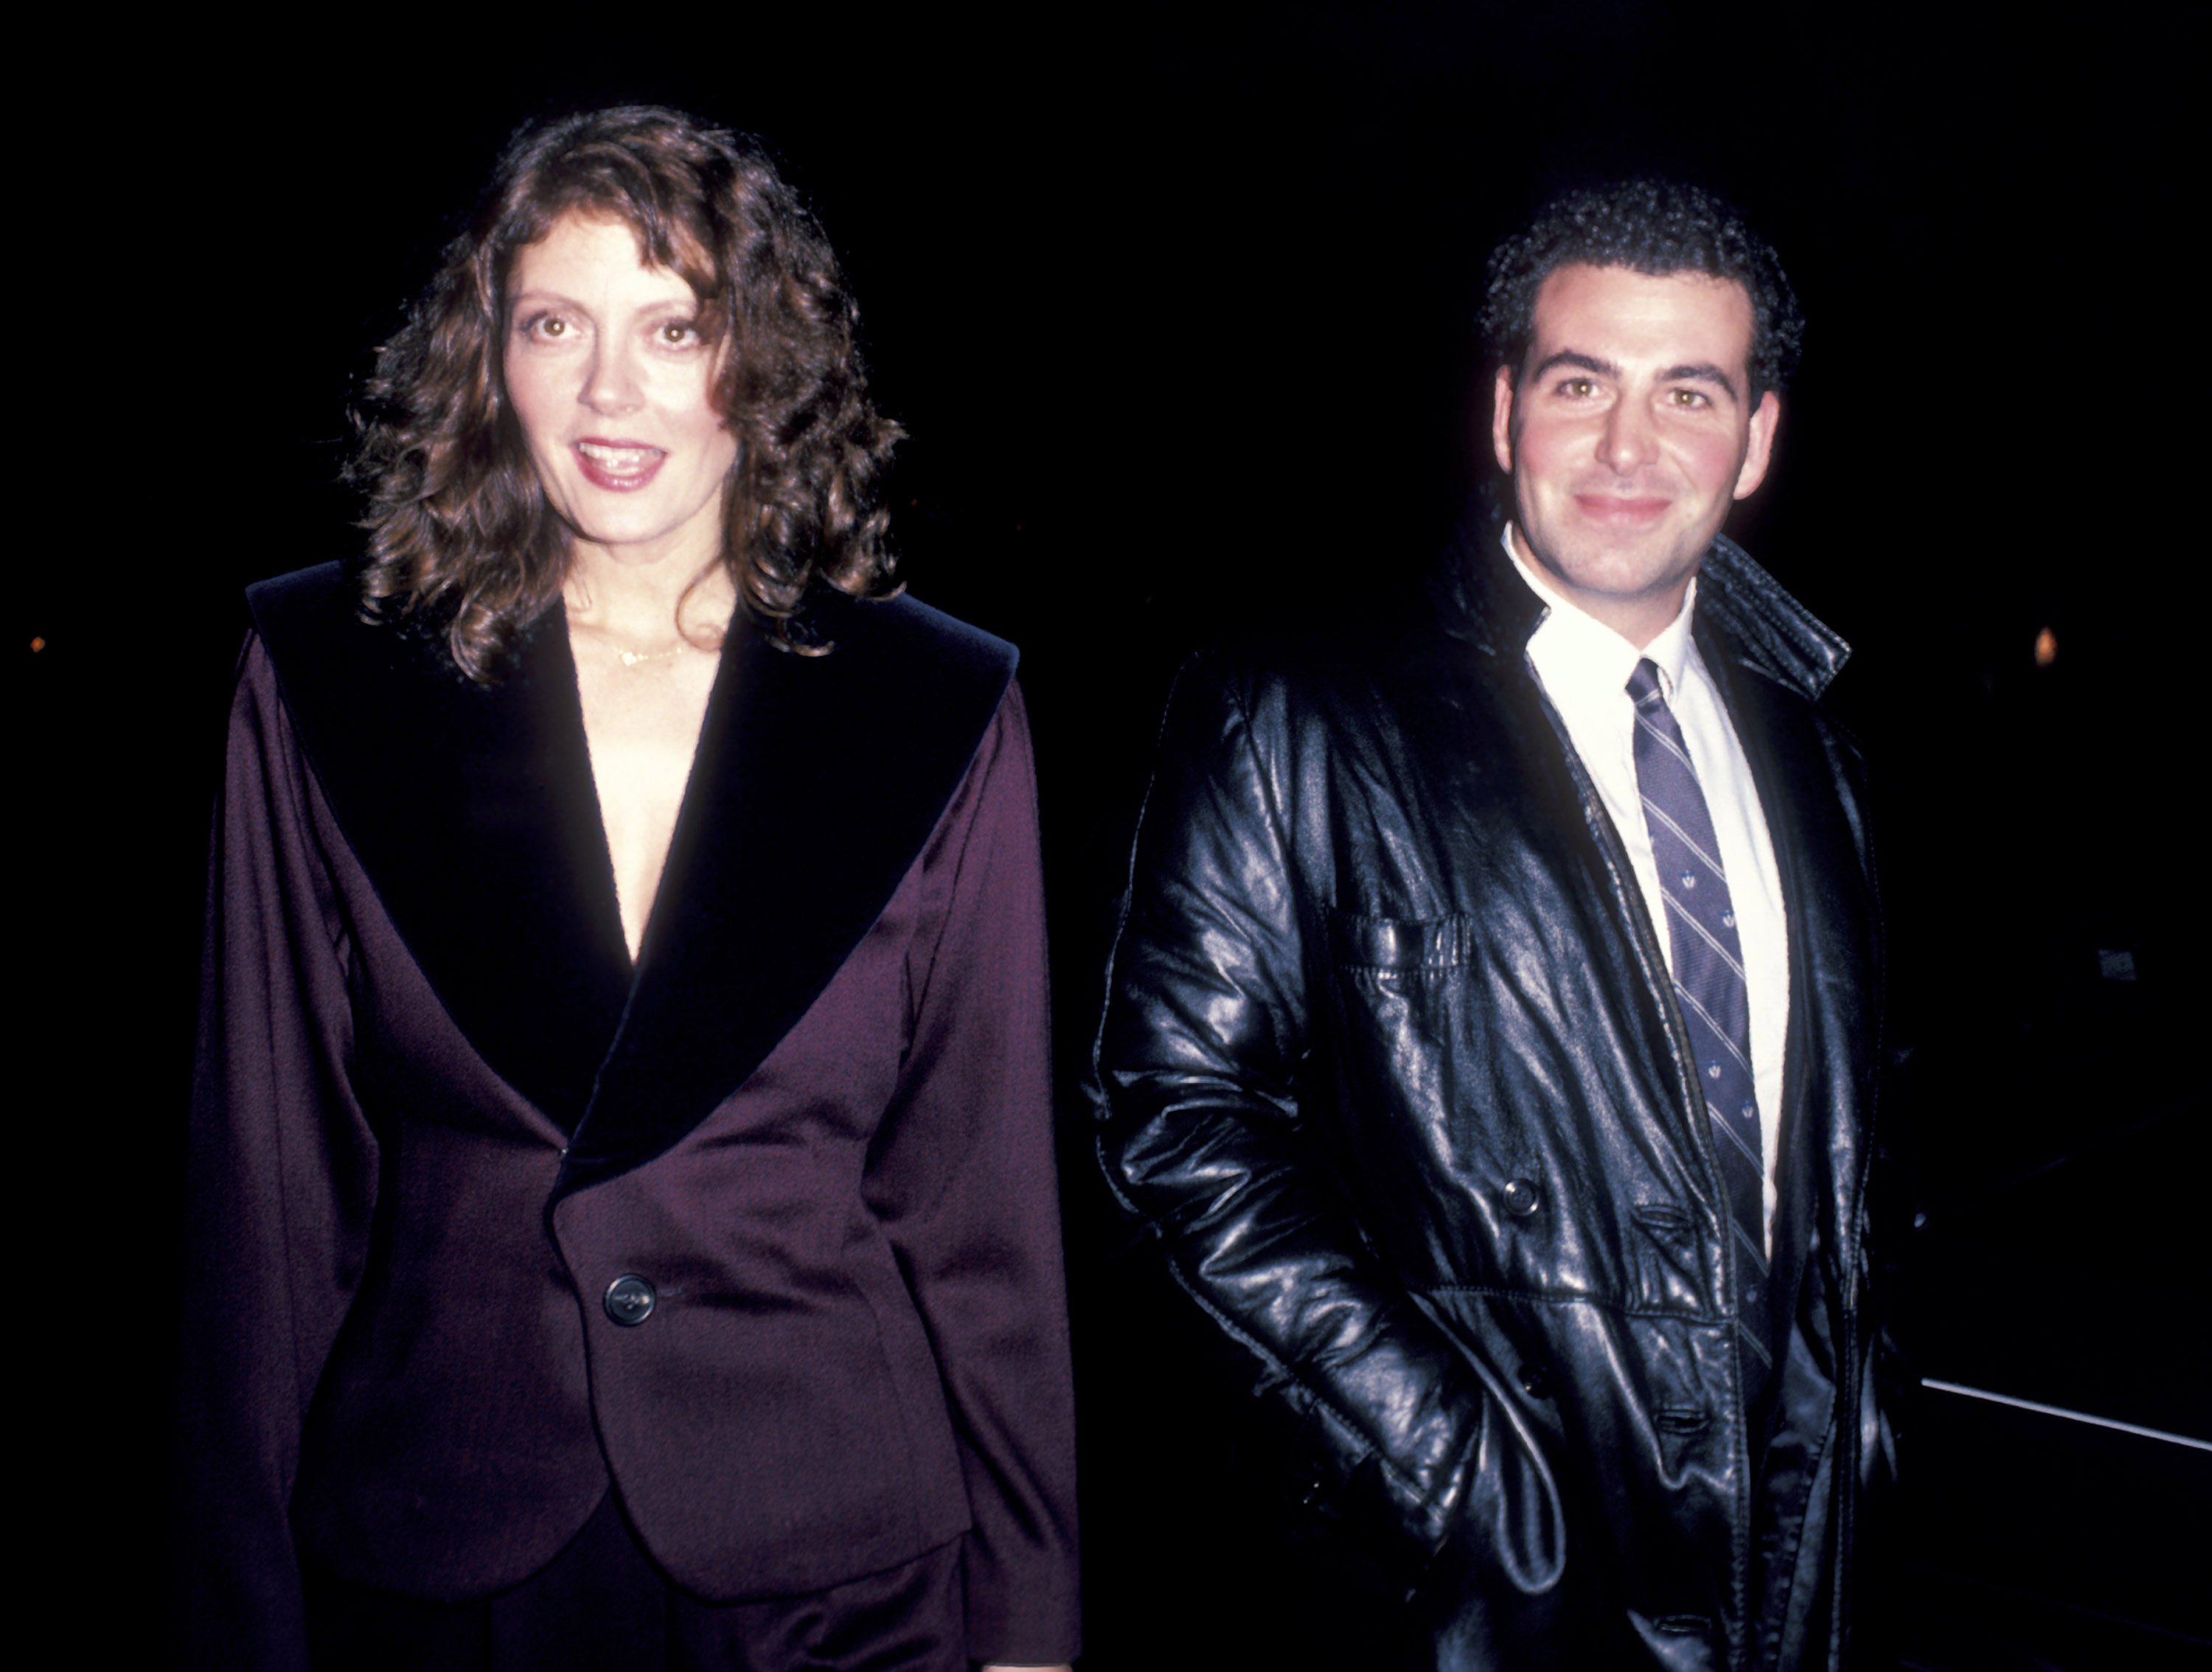 Susan Sarandon and Chris Sarandon at the premiere party for film "White Nights," circa 1985 | Source: Getty Images 